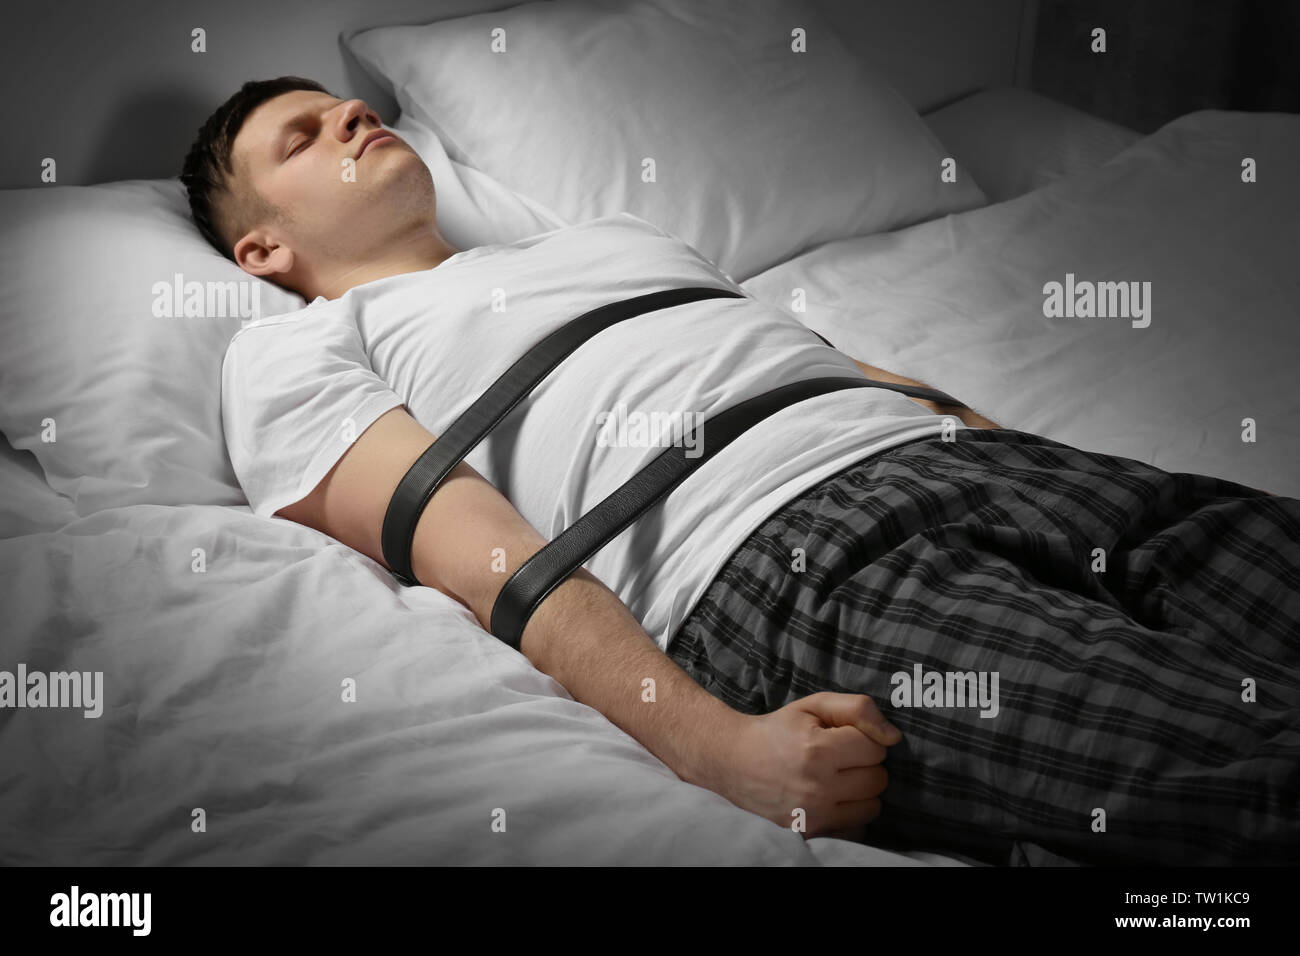 Young man tied up with belts in bed Stock Photo - Alamy.